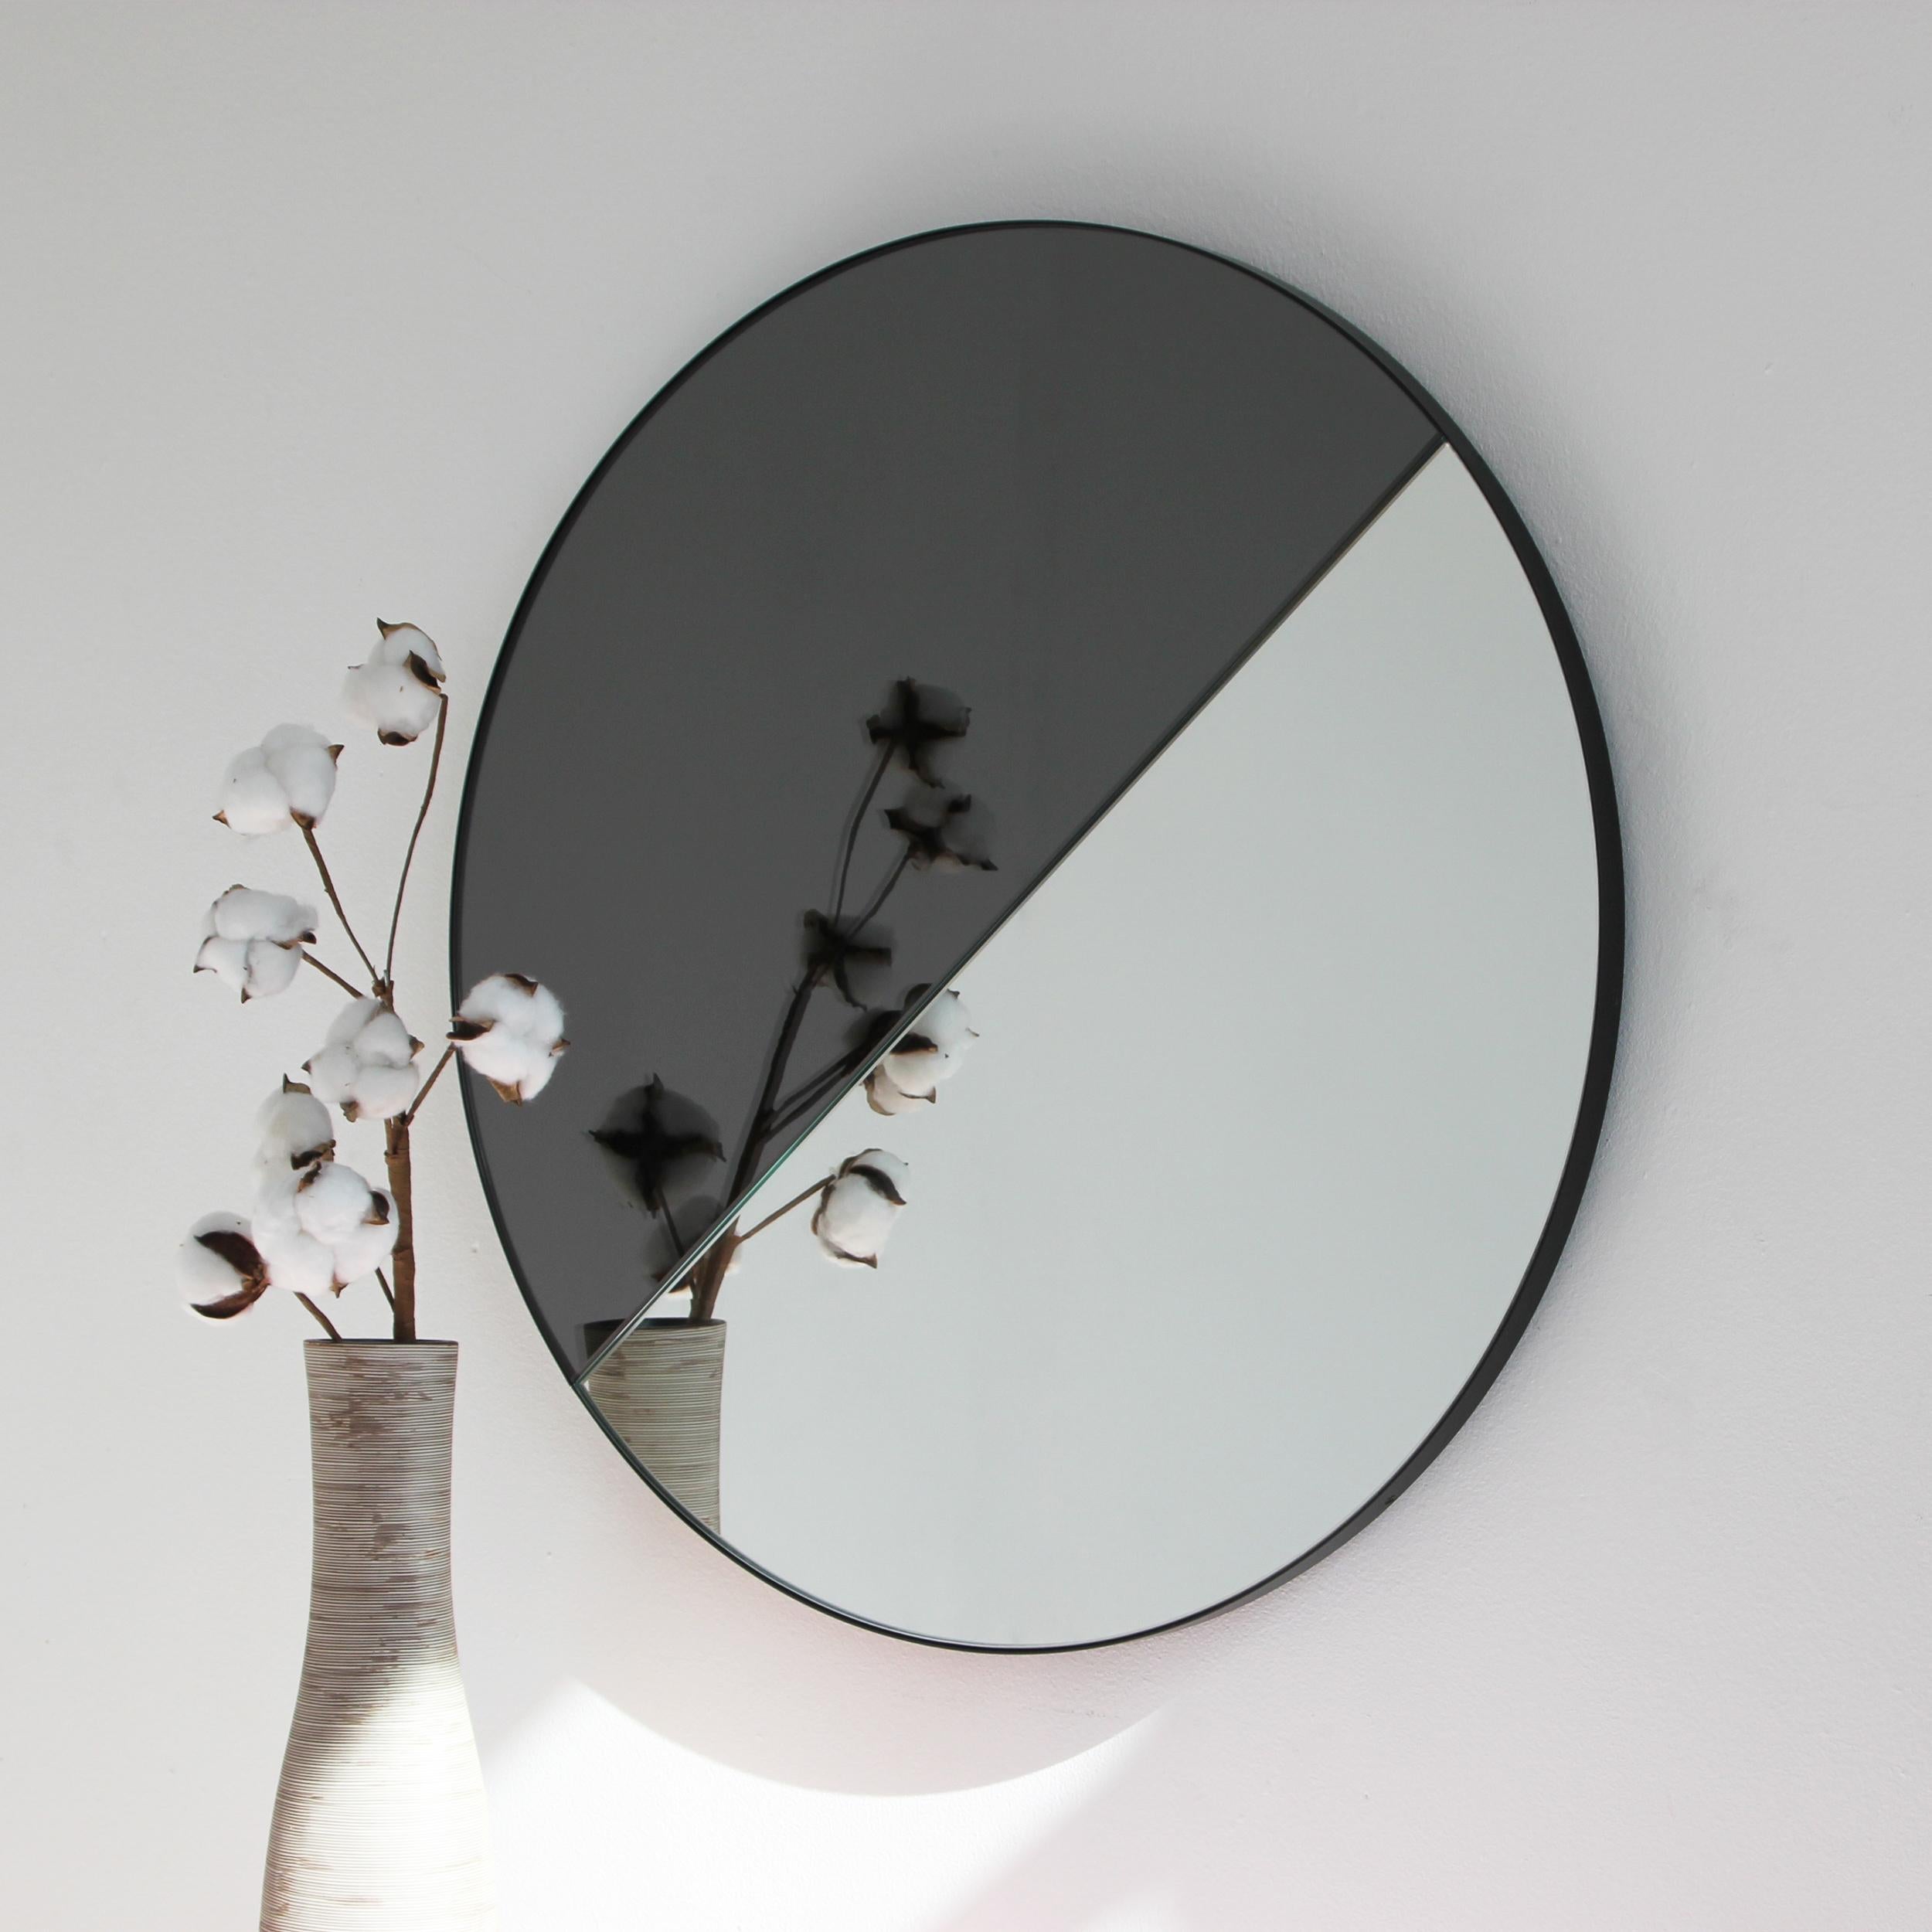 British Orbis Dualis Mixed Black Tint Contemporary Round Mirror with Black Frame, Small For Sale